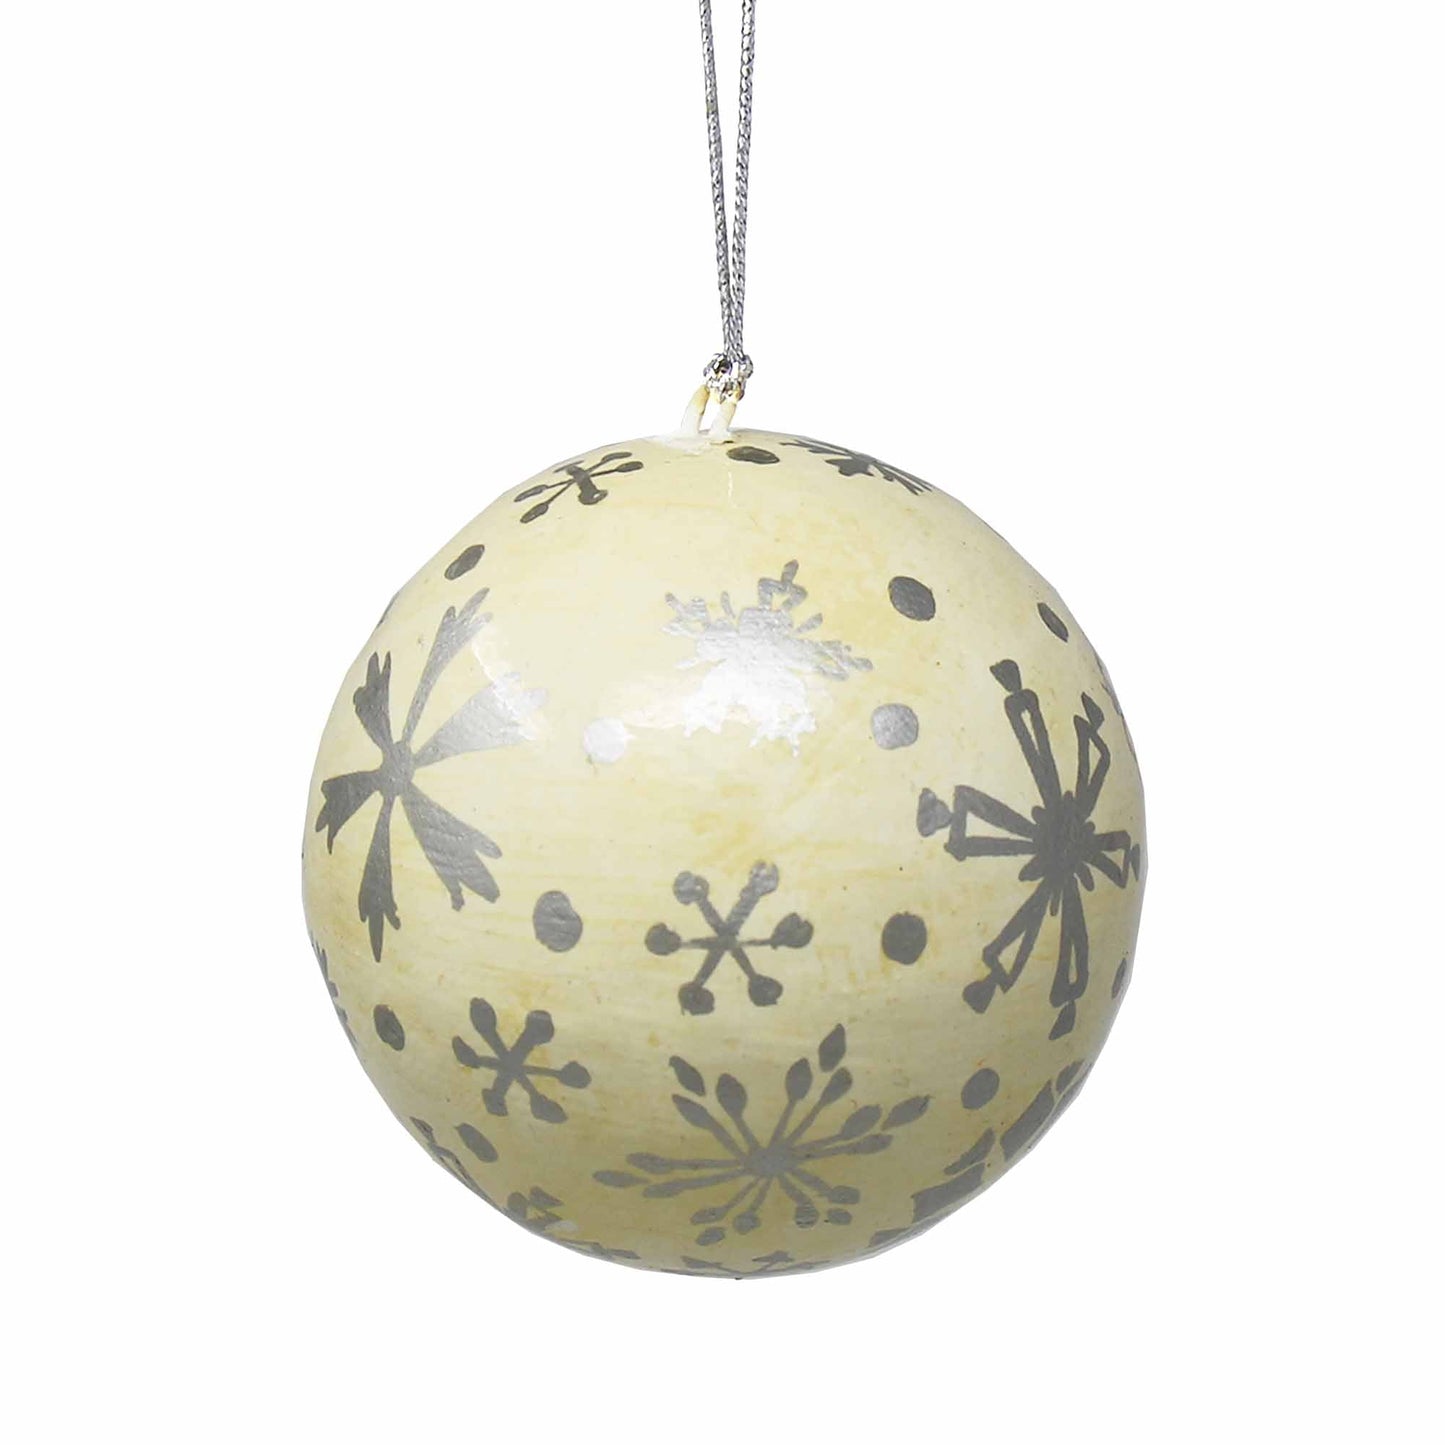 handpainted-silver-snowflakes-and-dots-papier-mache-hanging-ball-ornament